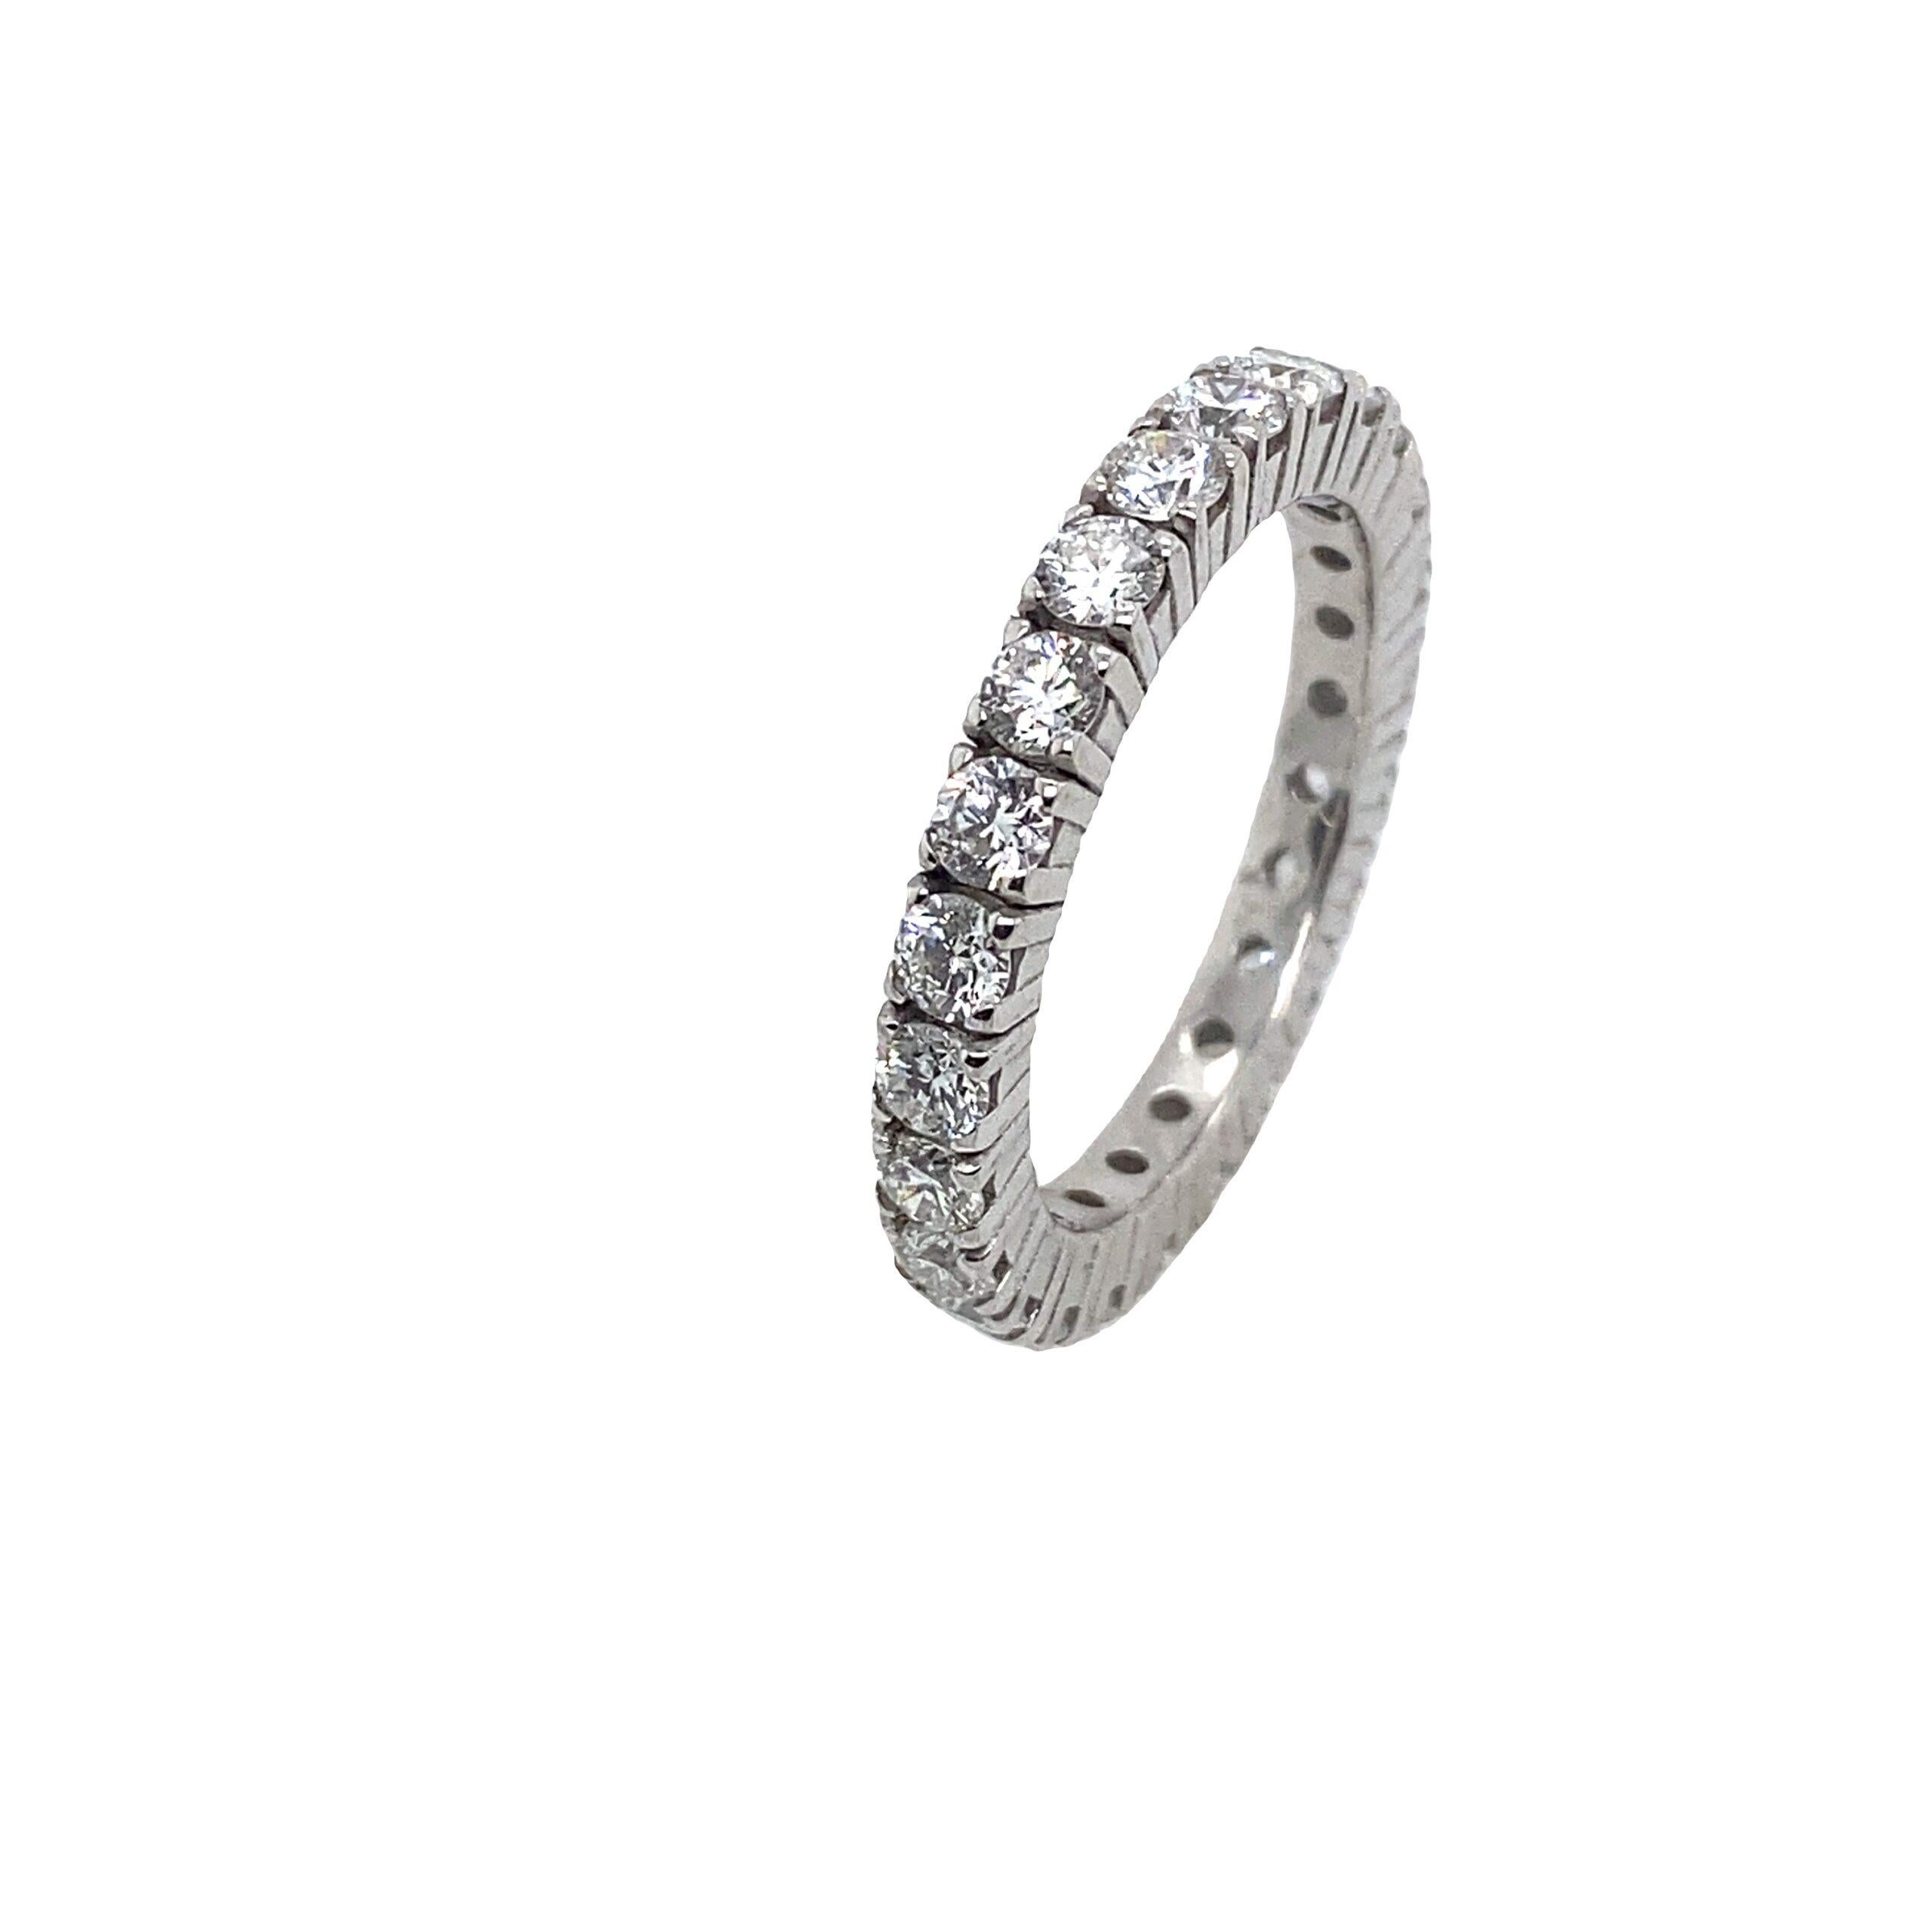 18ct White Gold Diamond Full Eternity Ring set with 1.80ct G/Vs Diamonds.

Additional Information:
Total Diamond Weight: 1.80ct
Diamond Colour: G
Diamond Purity: VS
Total weight: 4.7g
Ring size: N1/2
SMS2462